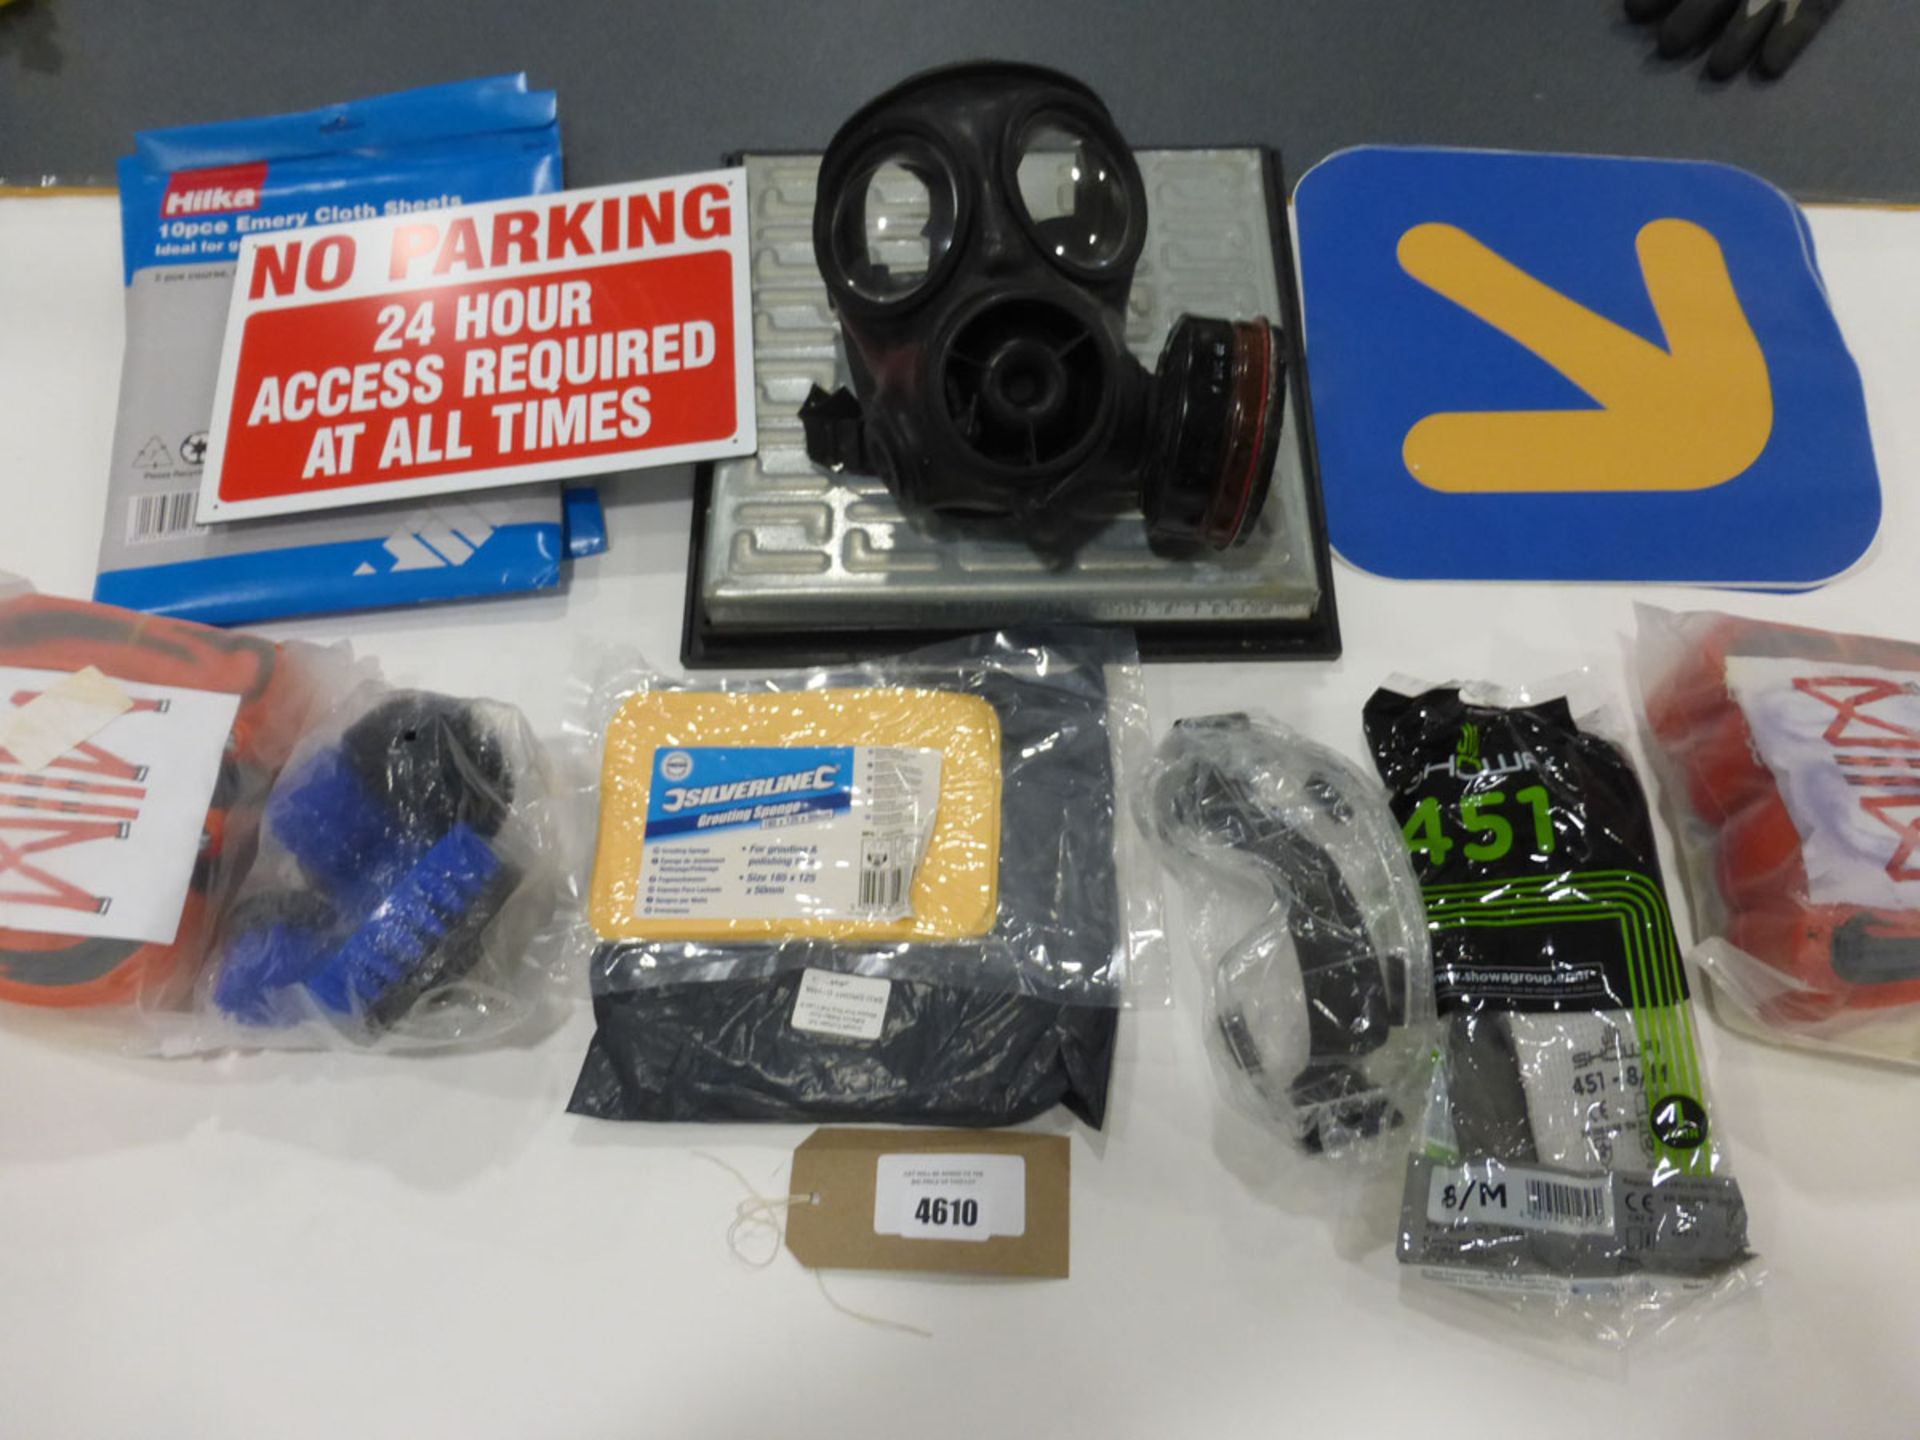 Bag containing No Parking signs, safety wear, gas mask, drain cover and other items